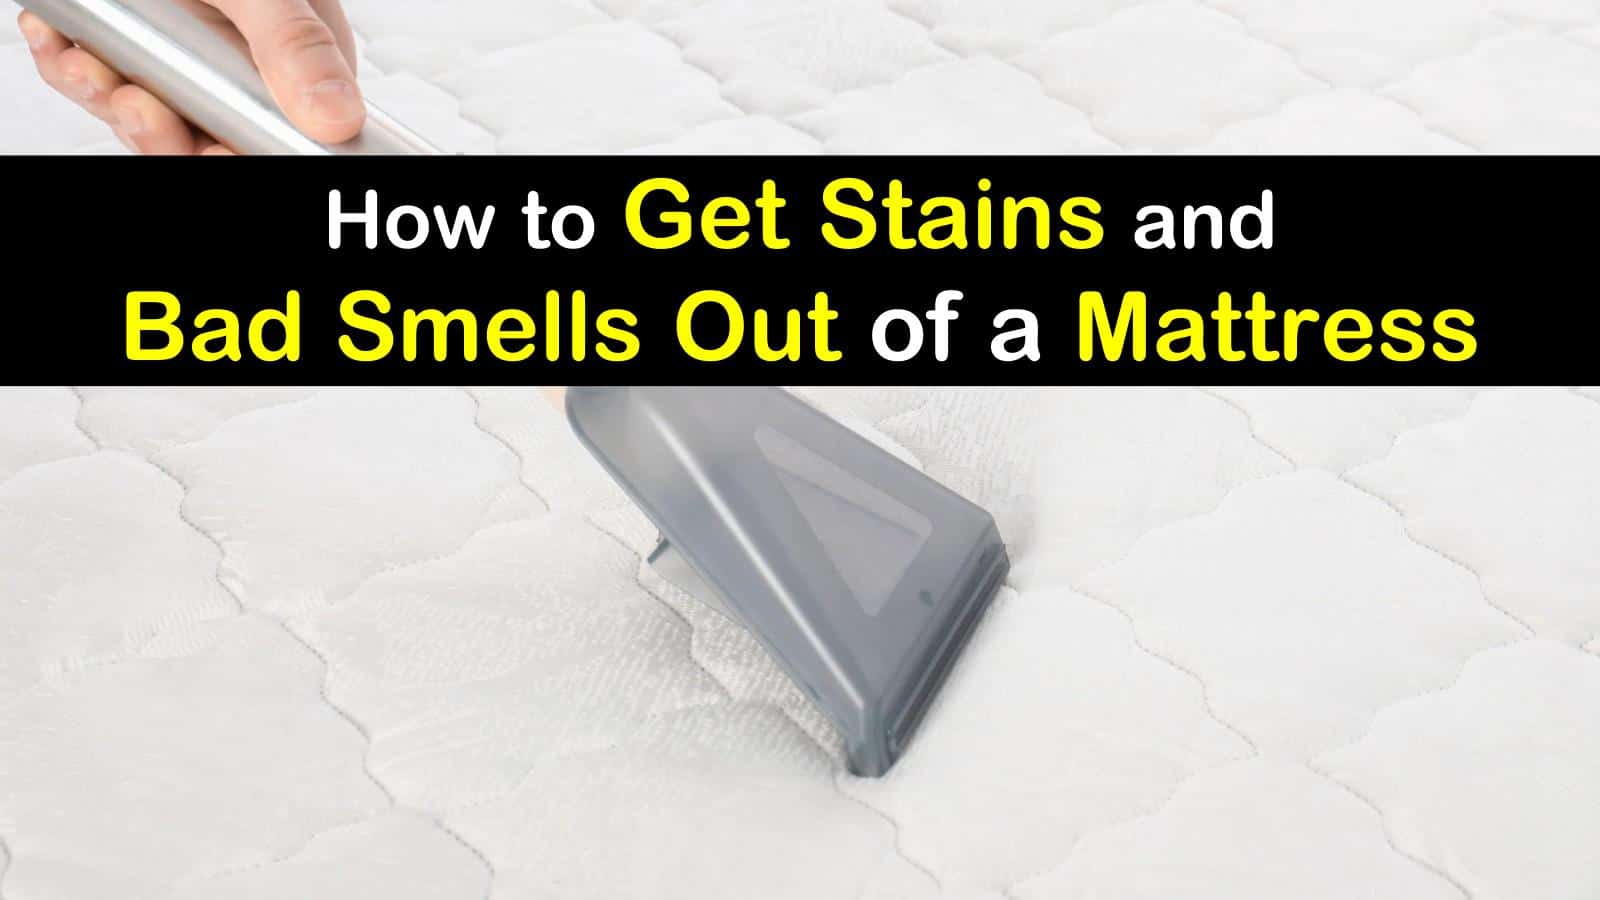 how to get stains out of a mattress titleimg1